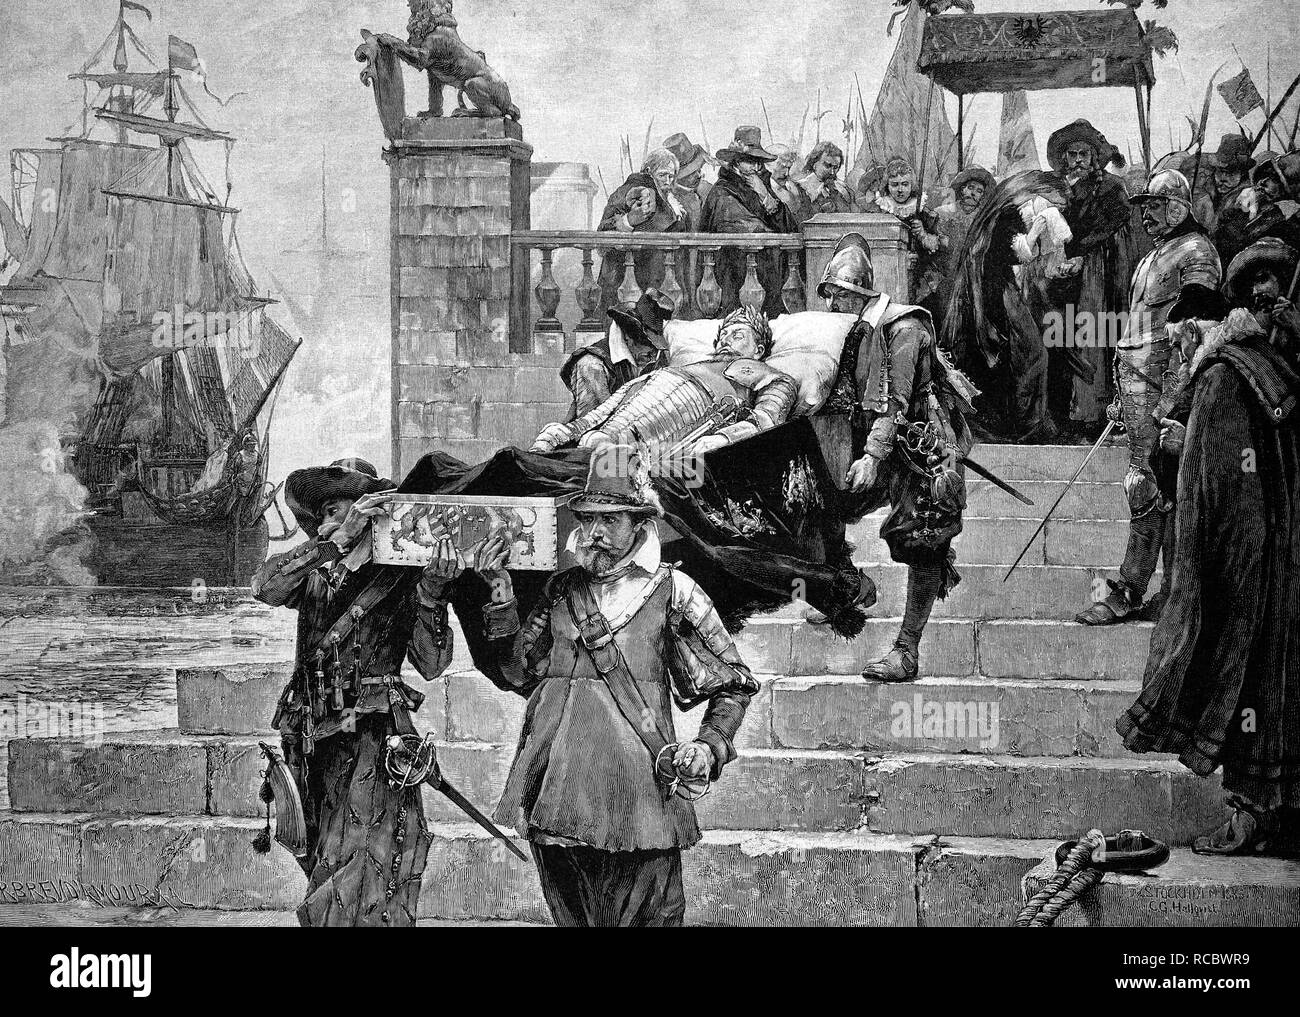 Embarkation of the body of Gustavus Adolphus at the port of Wolgast on 15/7/1633, historic engraving, 1888 Stock Photo